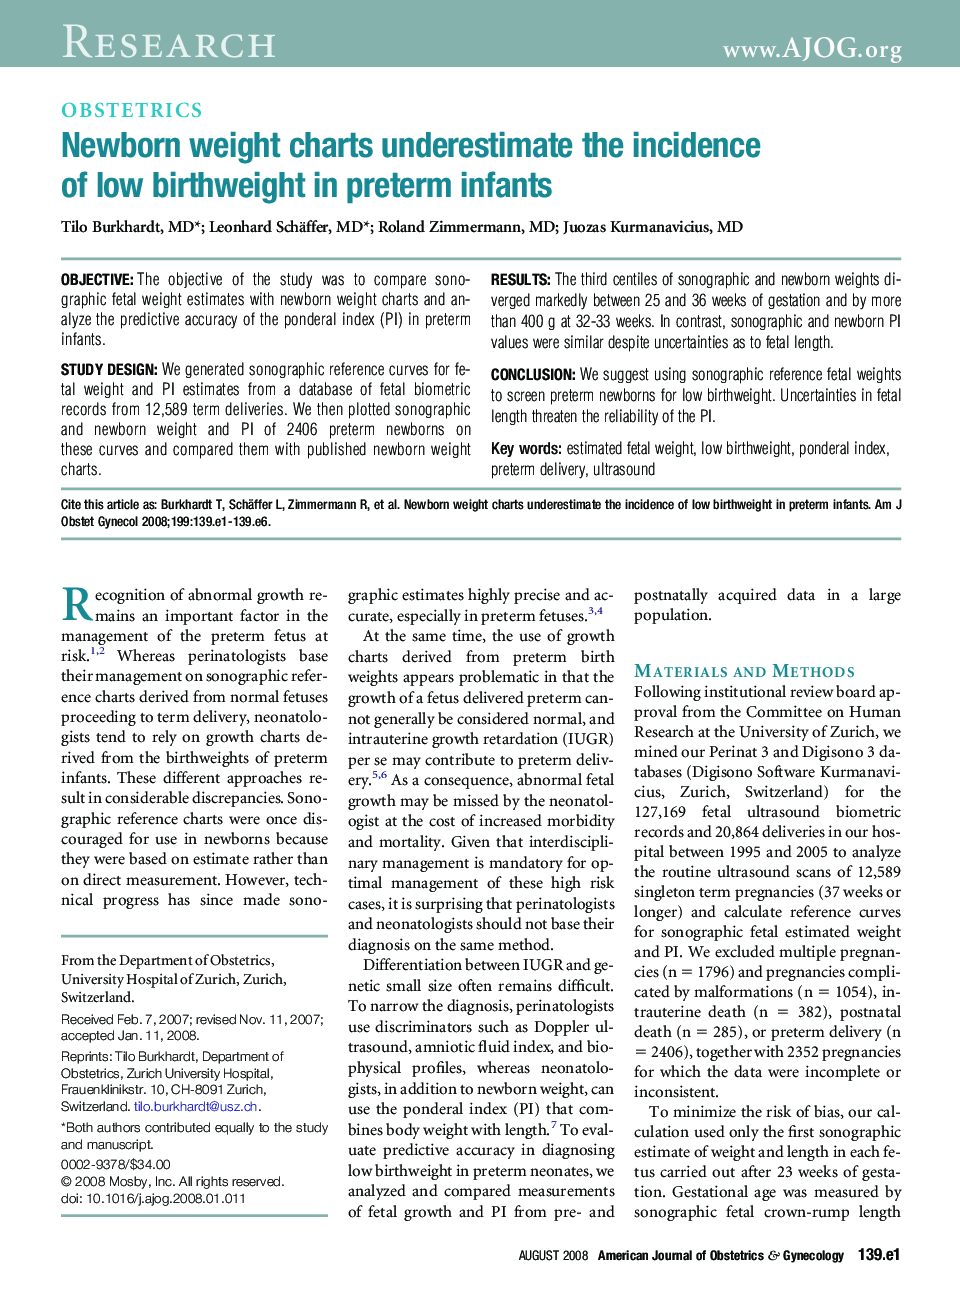 Newborn weight charts underestimate the incidence of low birthweight in preterm infants